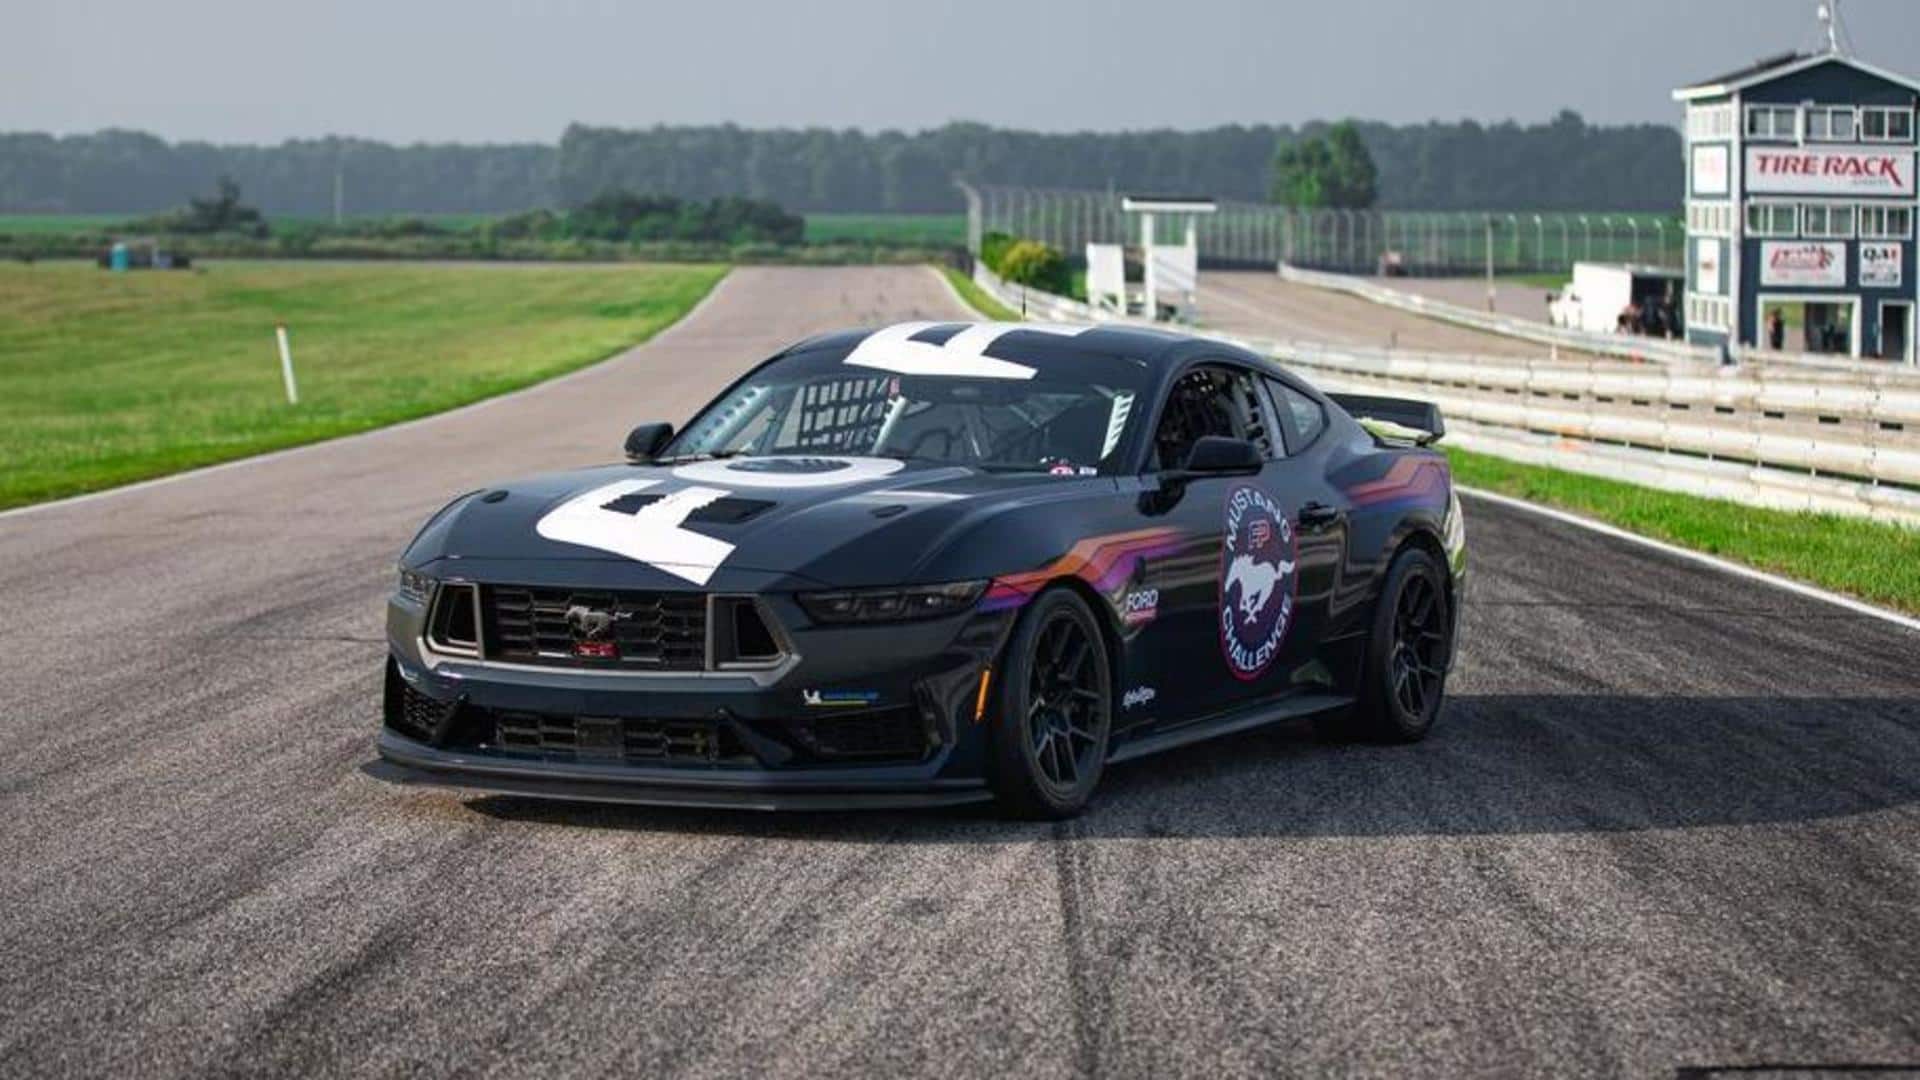 Track-only Ford Mustang Dark Horse R revealed: Check best features